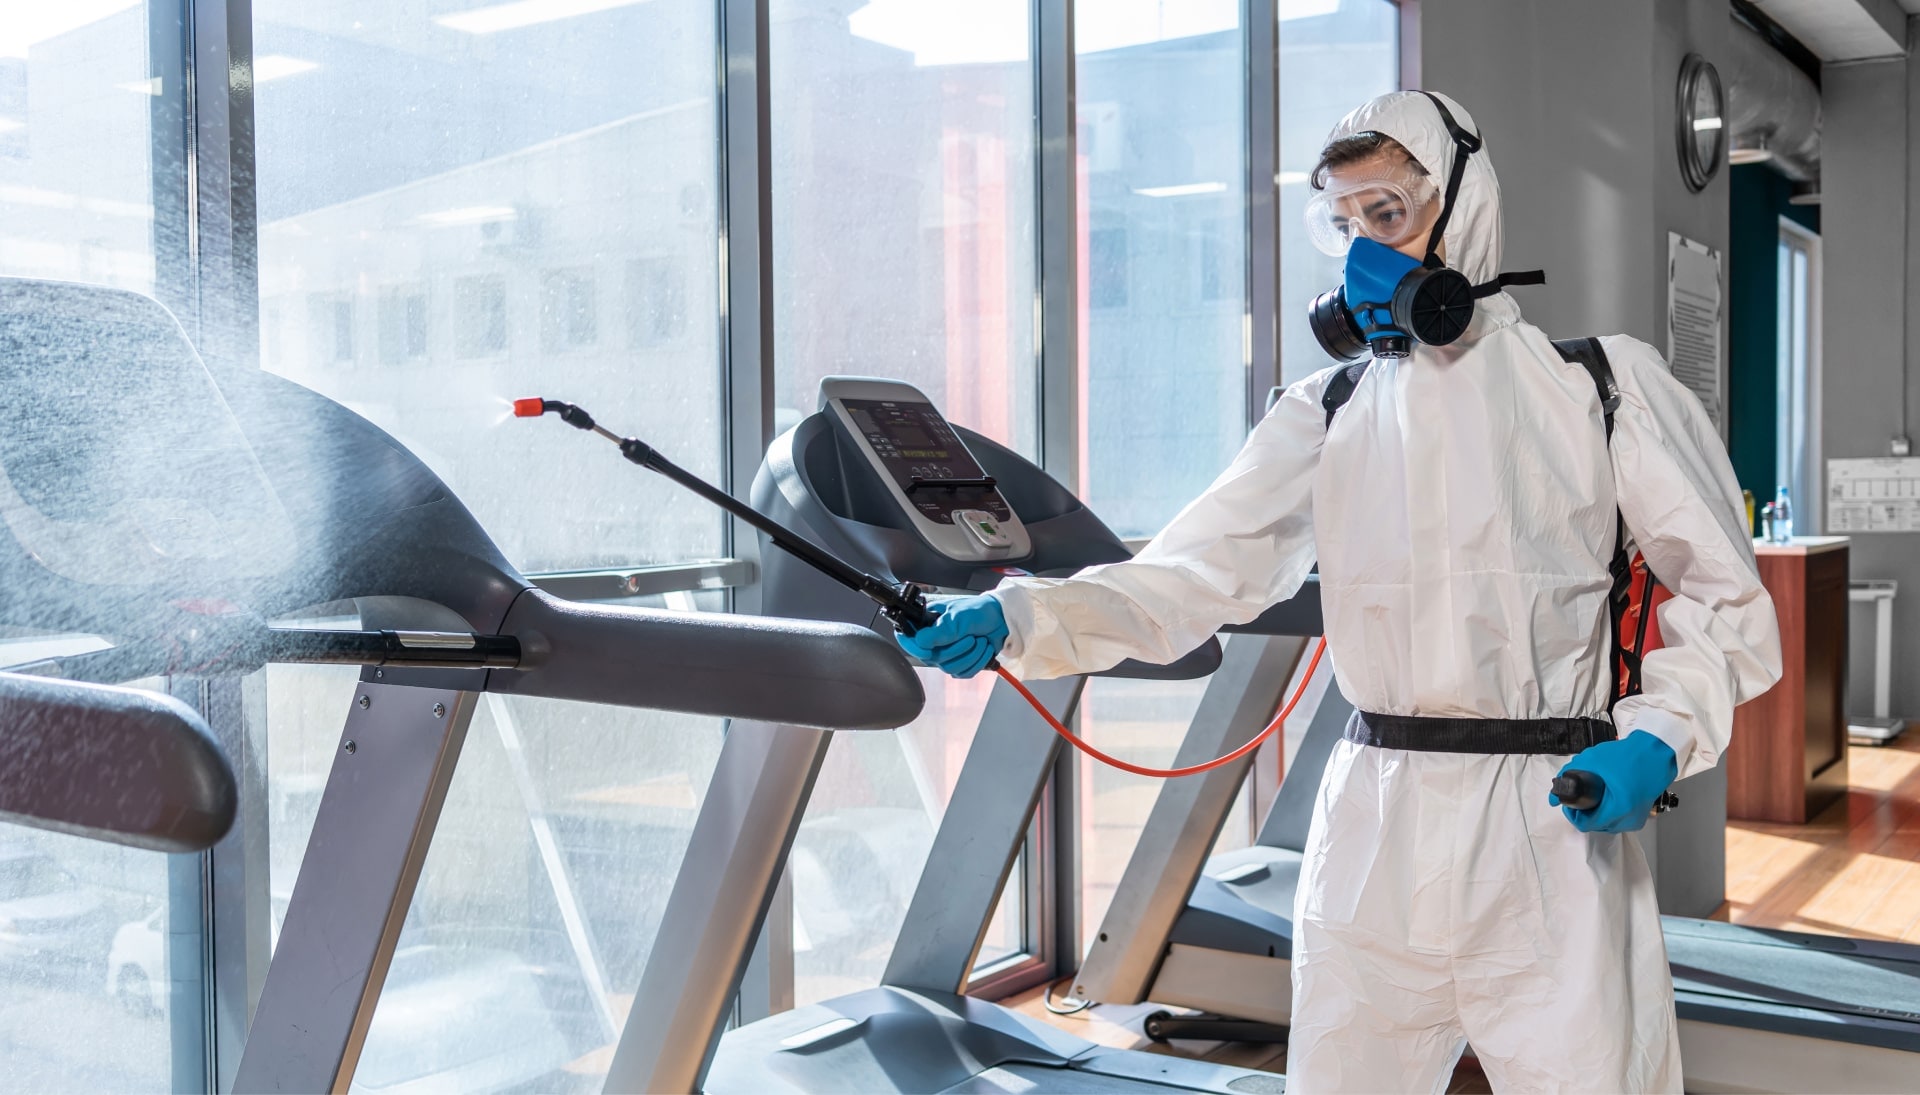 For commercial mold removal, we use the latest technology to identify and eliminate mold damage in Caldwell, New Jersey.